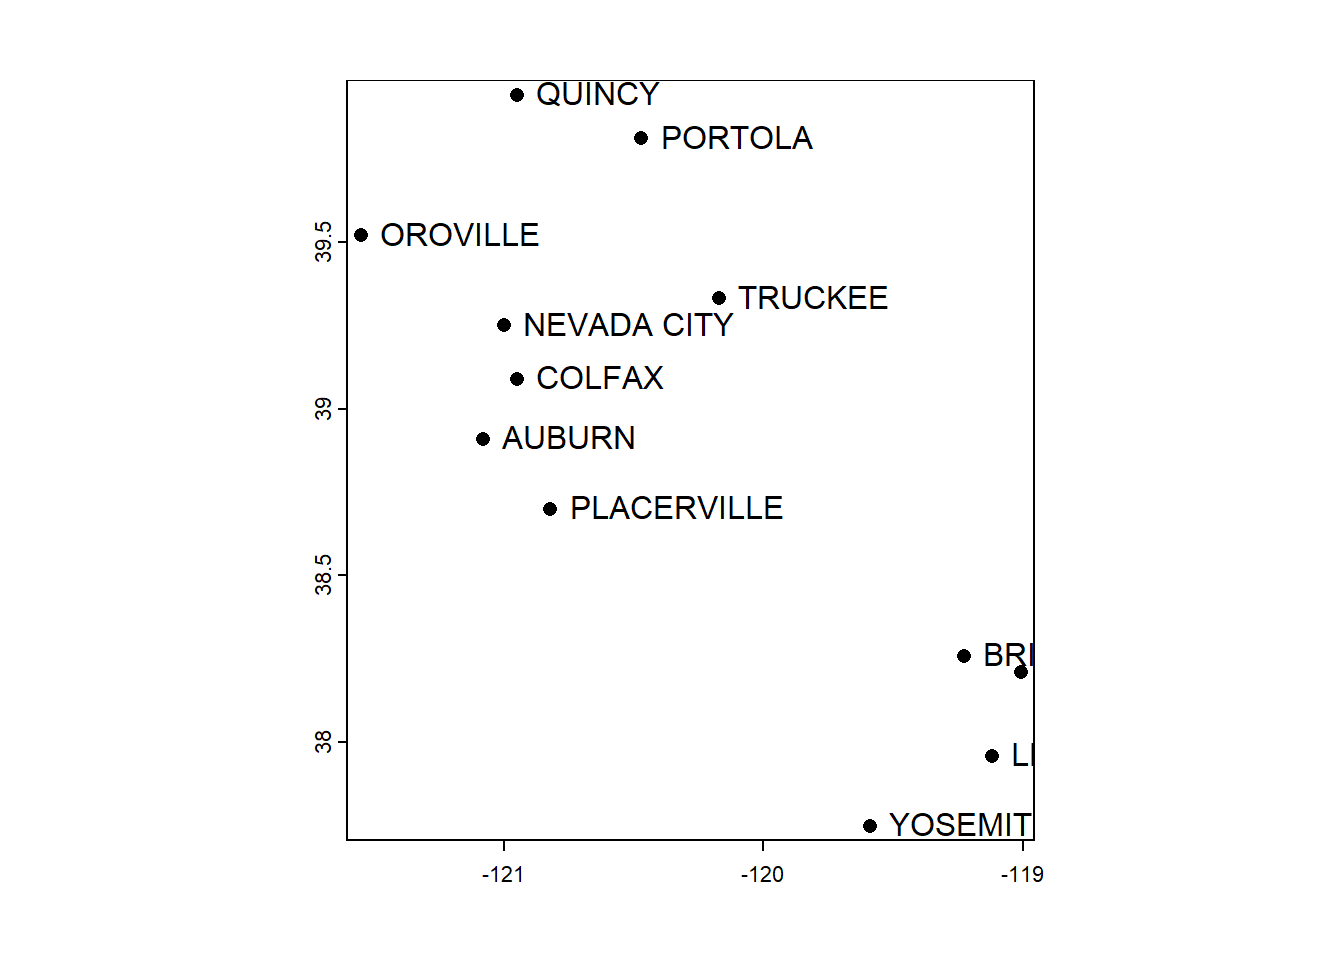 Simple plot of SpatVector point data, with labels